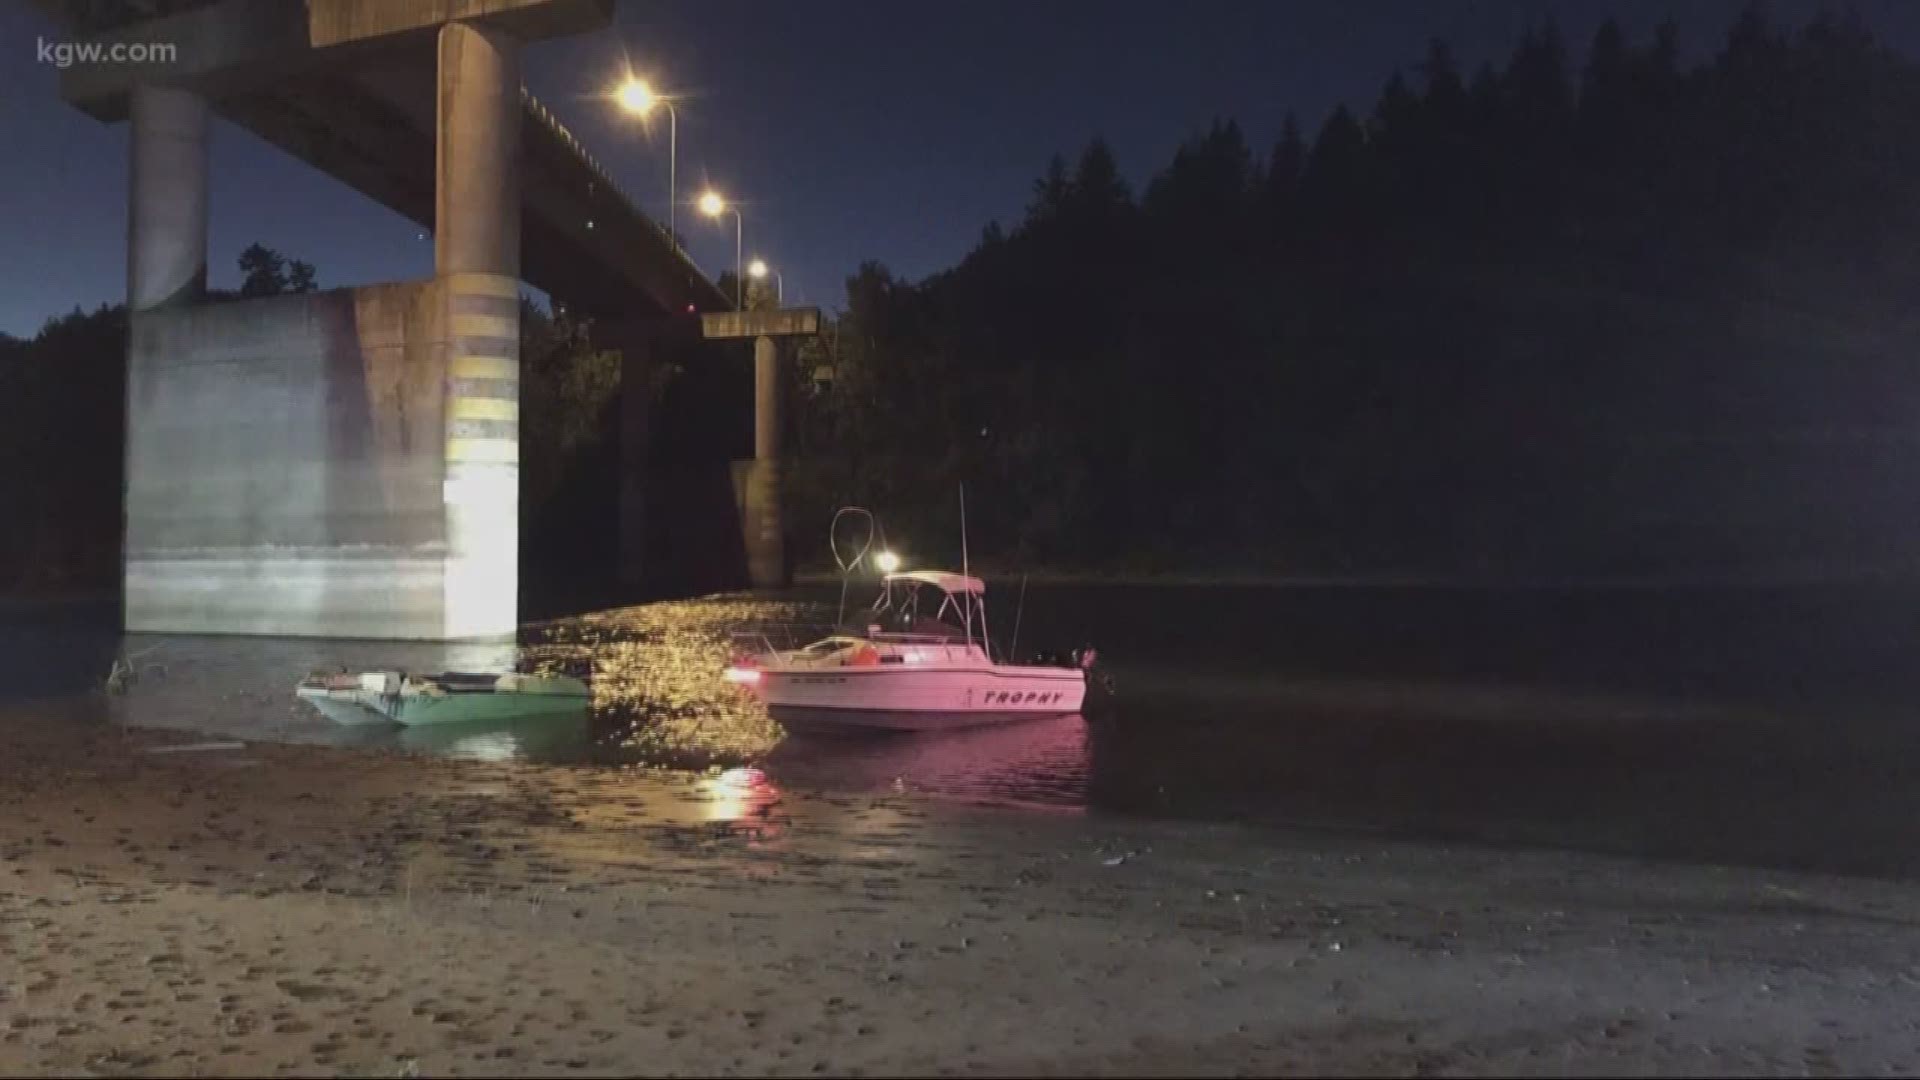 Police say a woman from Gladstone, Oregon died and her husband was critically injured in a boat crash in the Camas Slough.